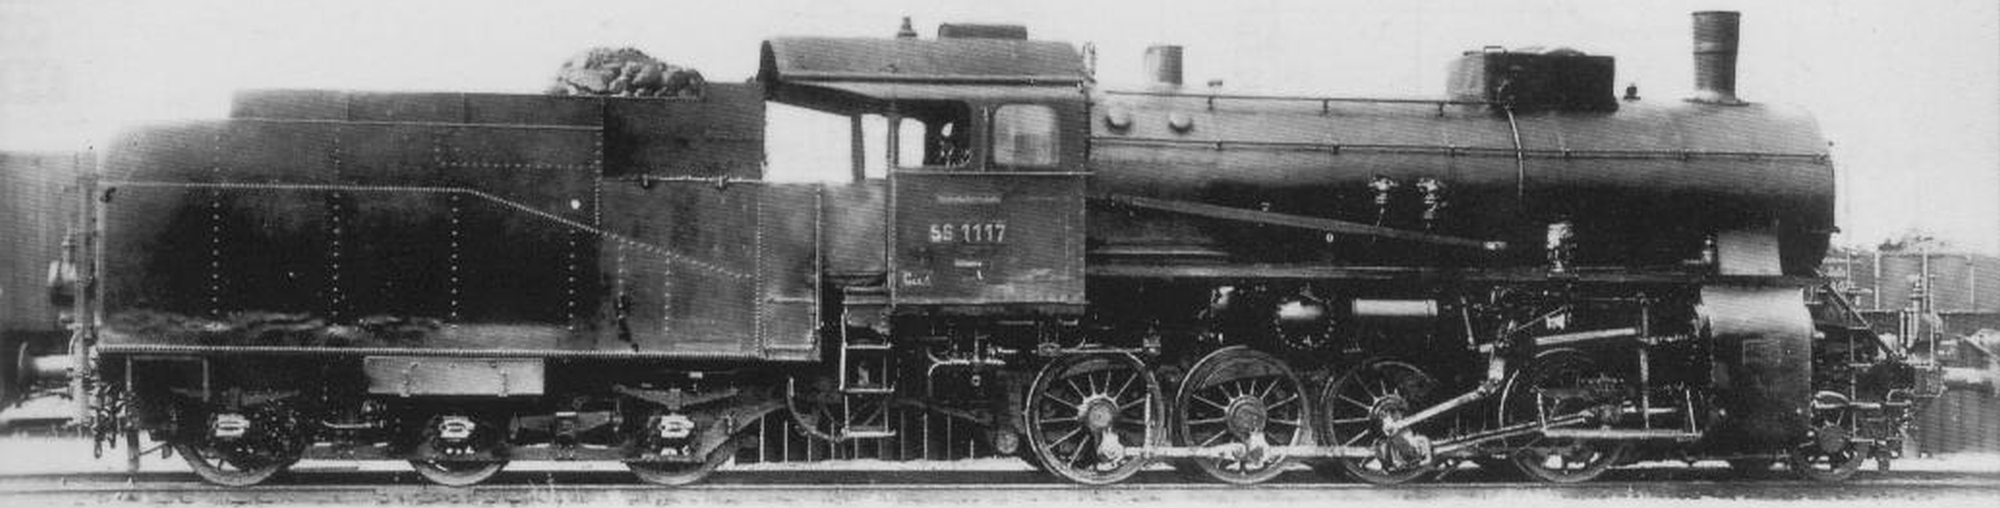 The 56 1117, one of the last examples, at the time of the Deutsche Reichsbahn